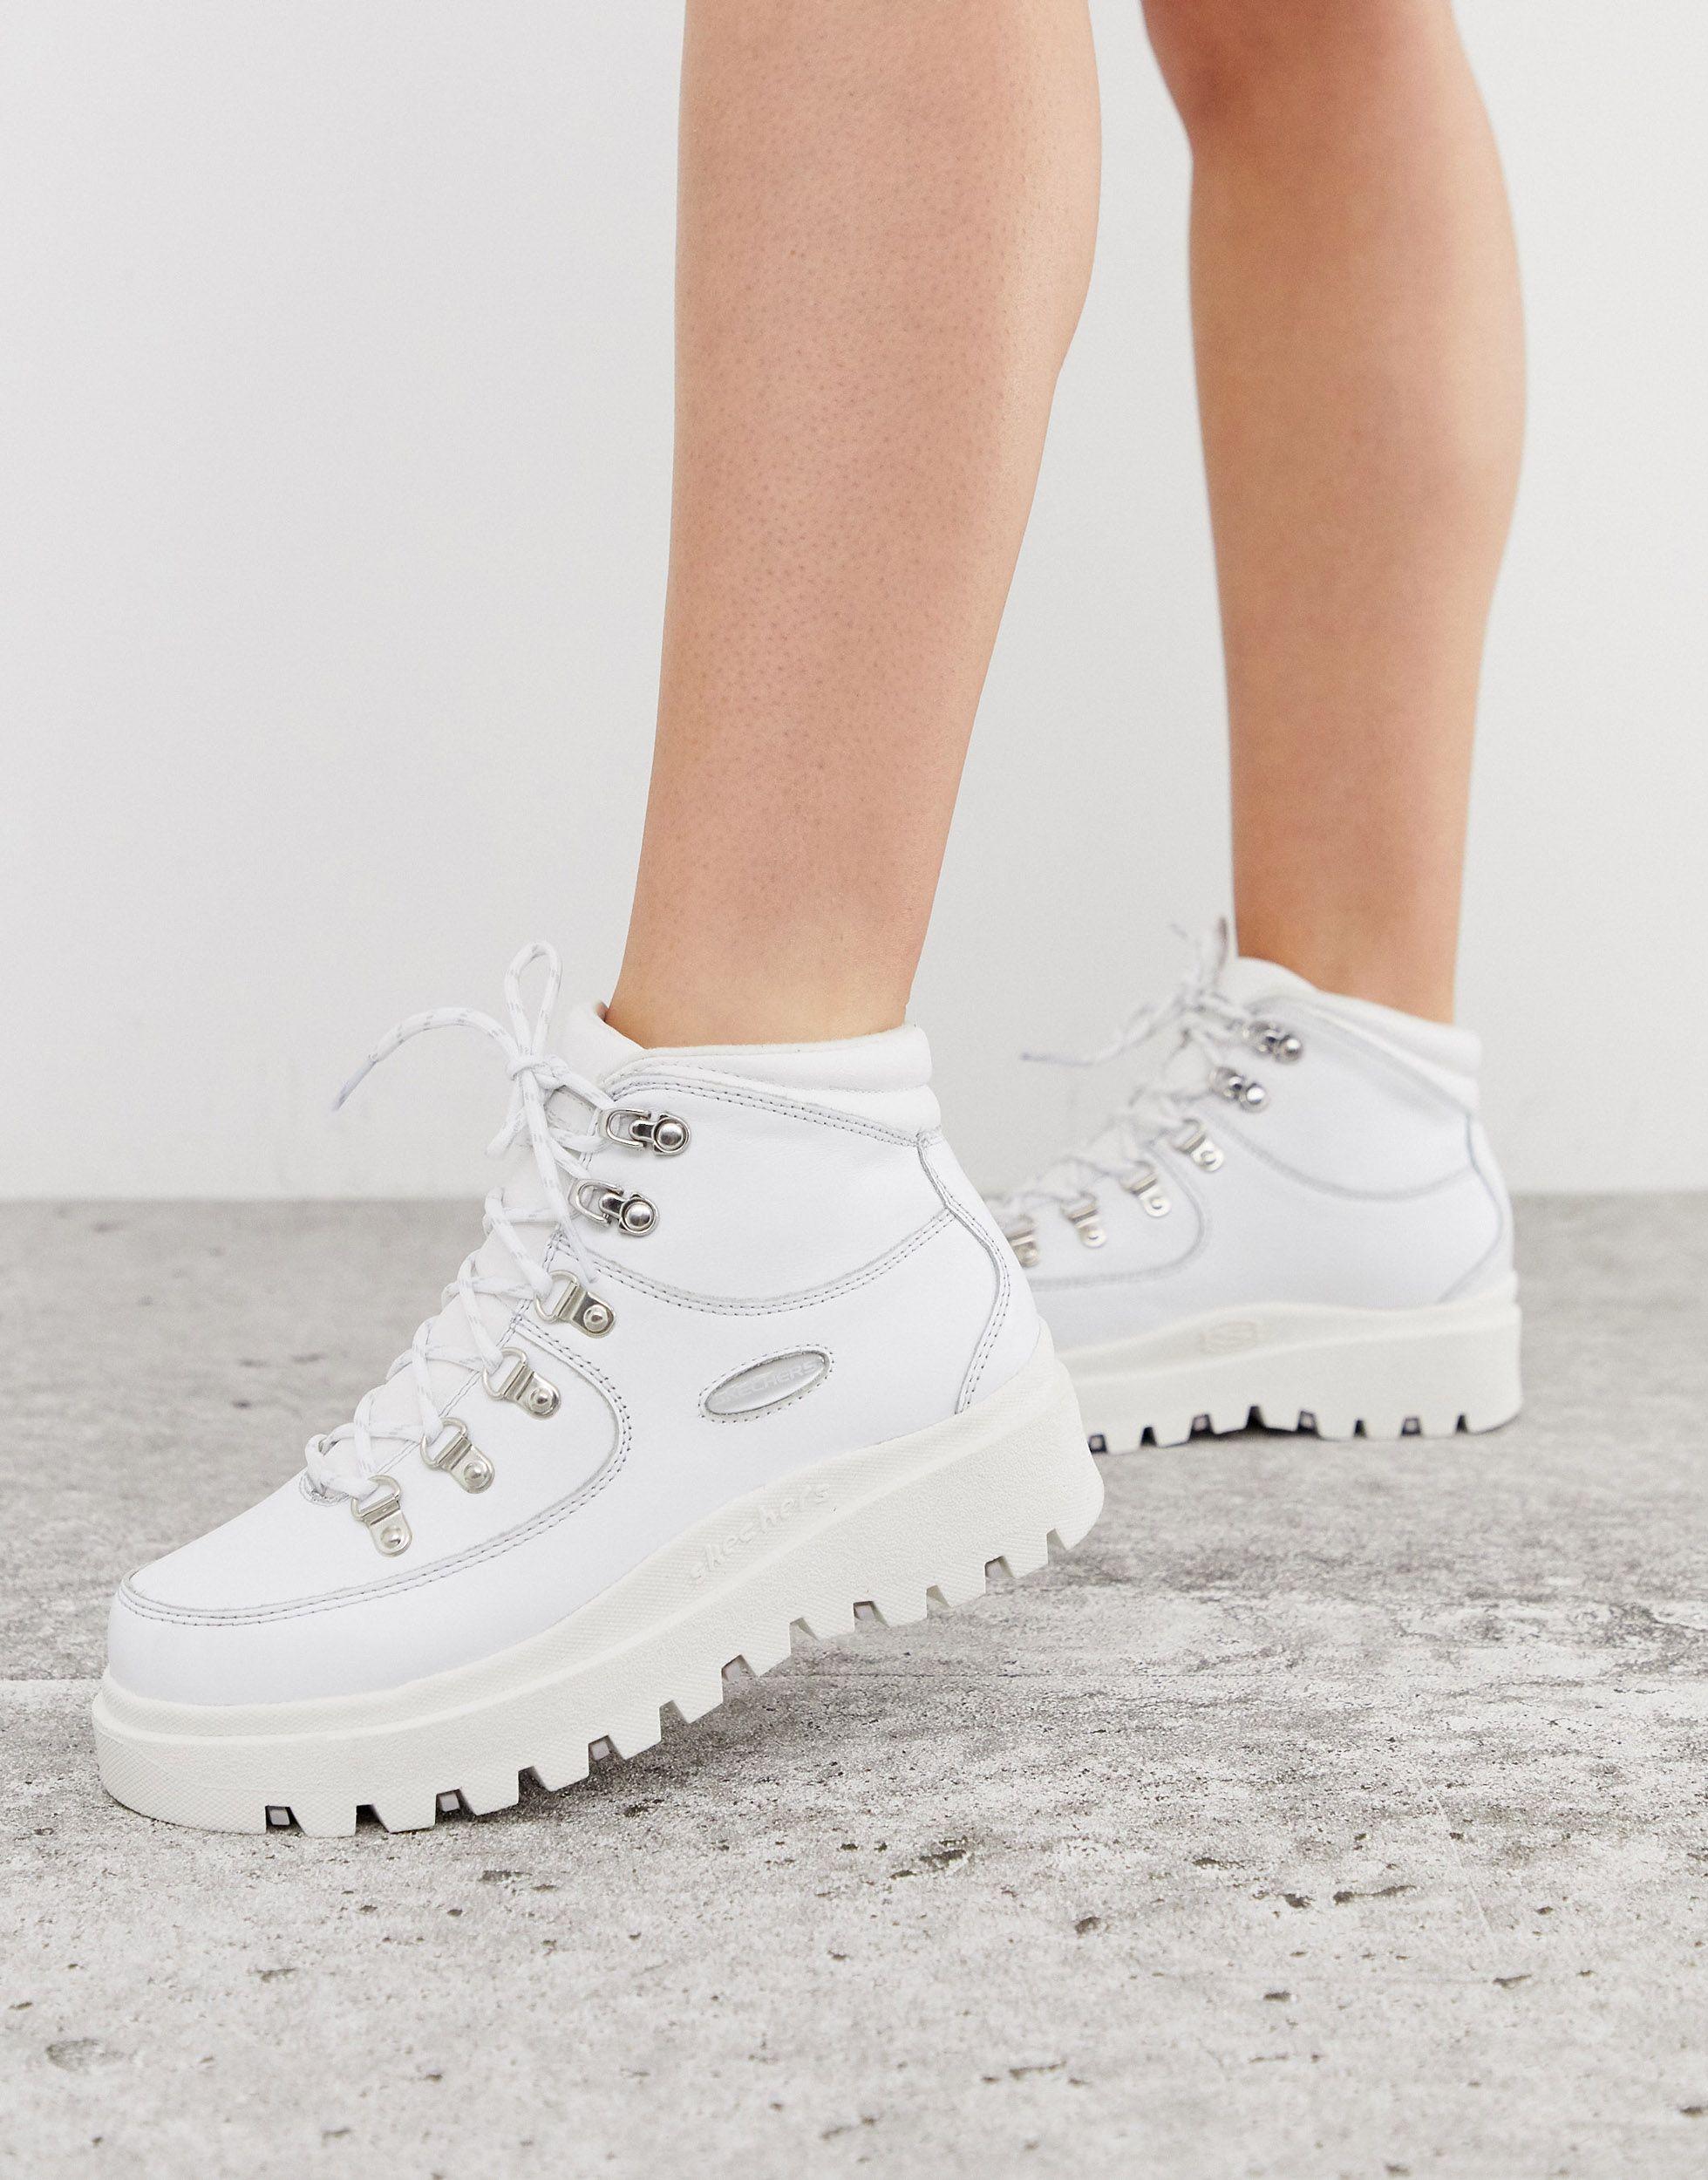 Skechers Shindig 6 Eye Leather Hiker Boot in White - Lyst